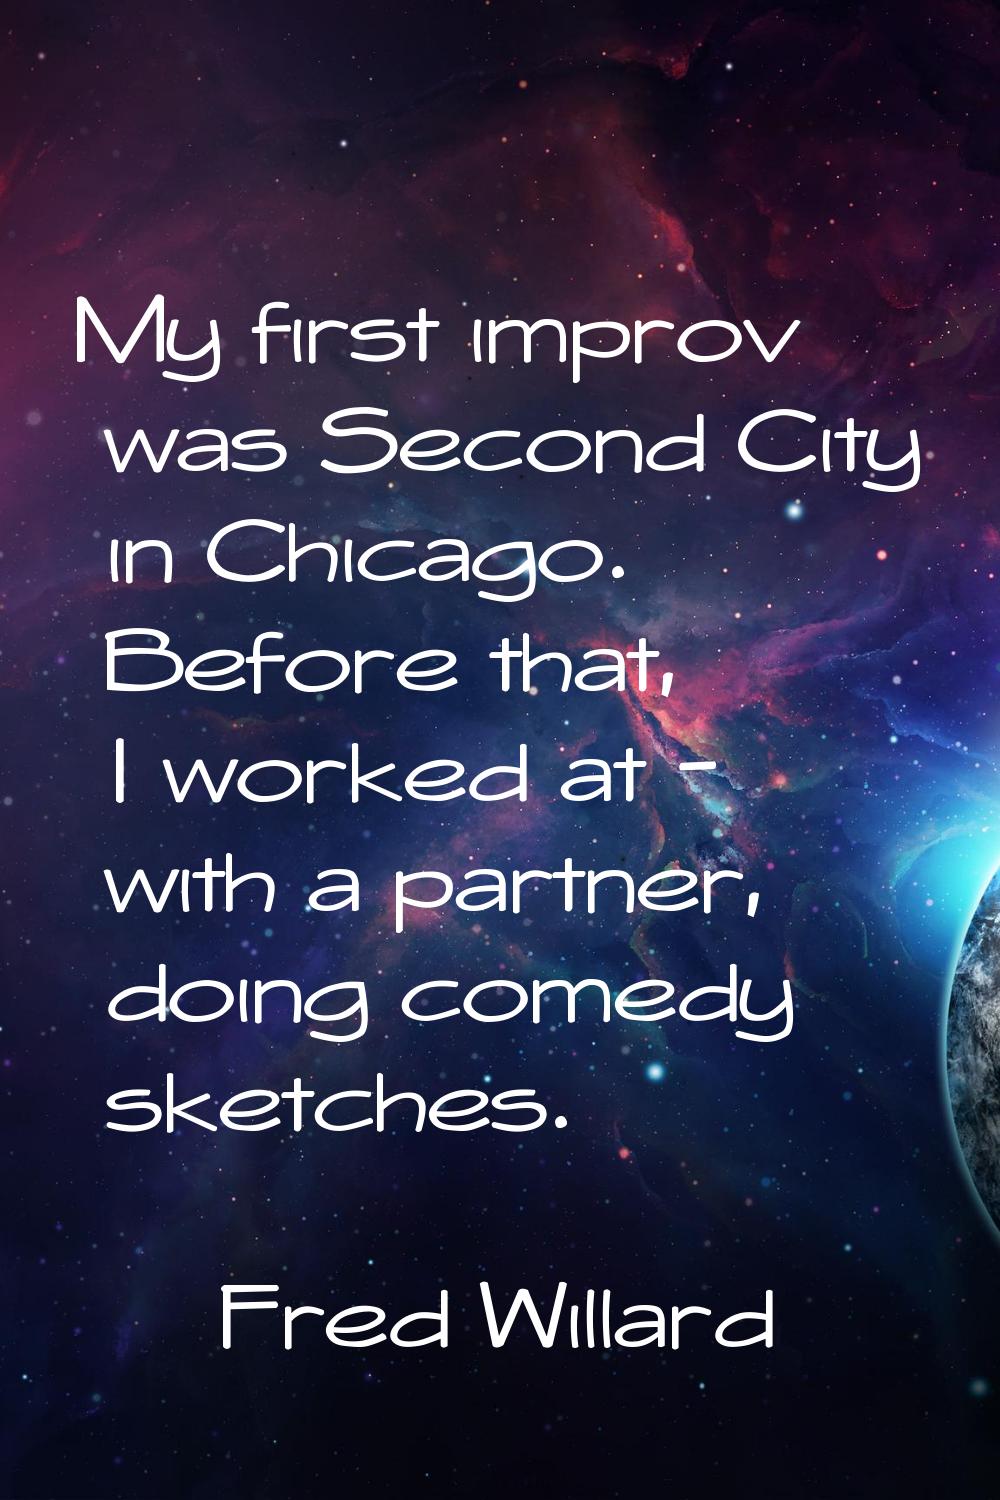 My first improv was Second City in Chicago. Before that, I worked at - with a partner, doing comedy